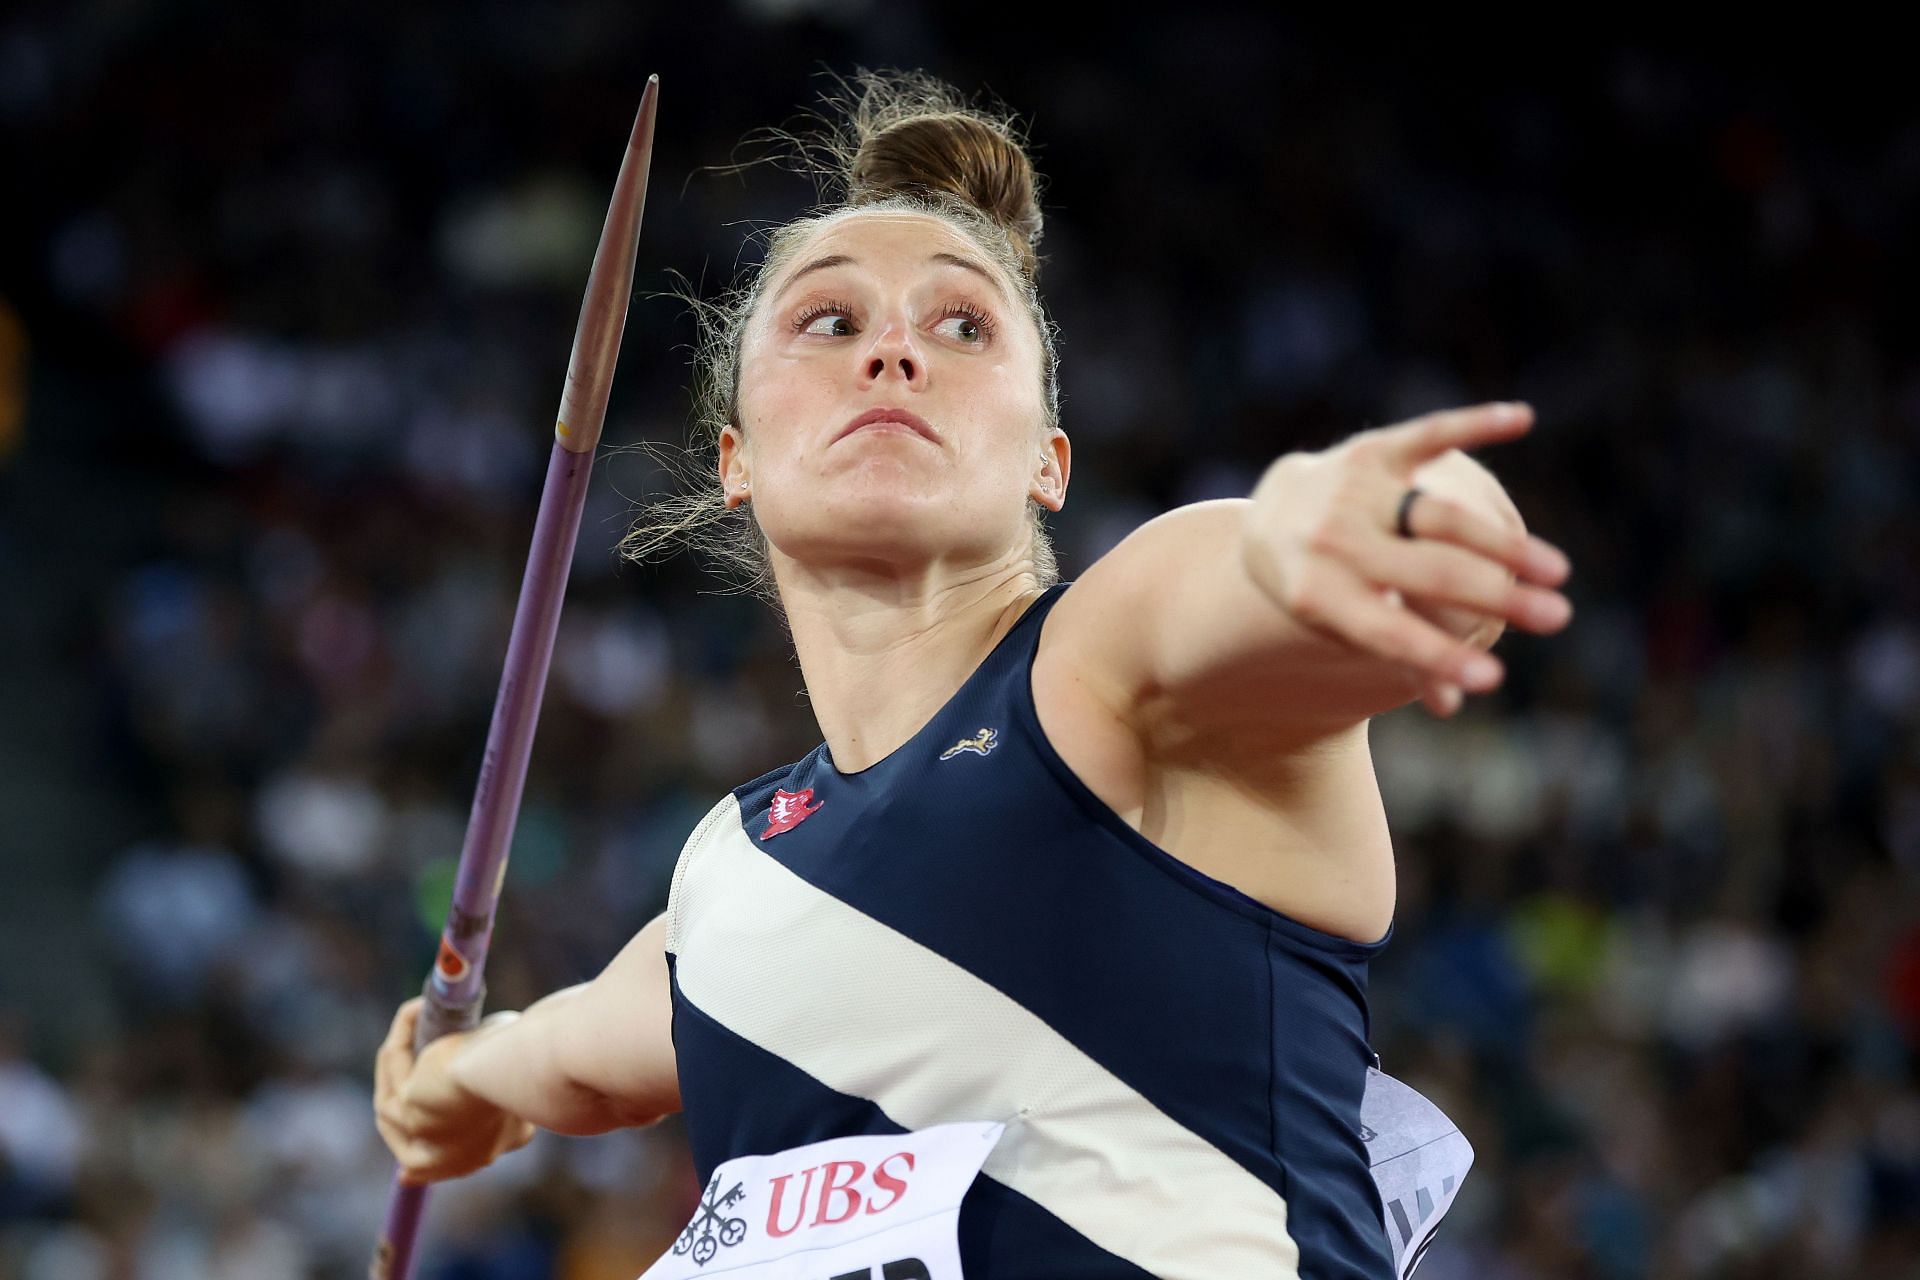 Kara Winger of the United States competes in the Women&#039;s Javelin Throw during the Weltklasse Zurich 2022, part of the 2022 Diamond League series at Stadion Letzigrund